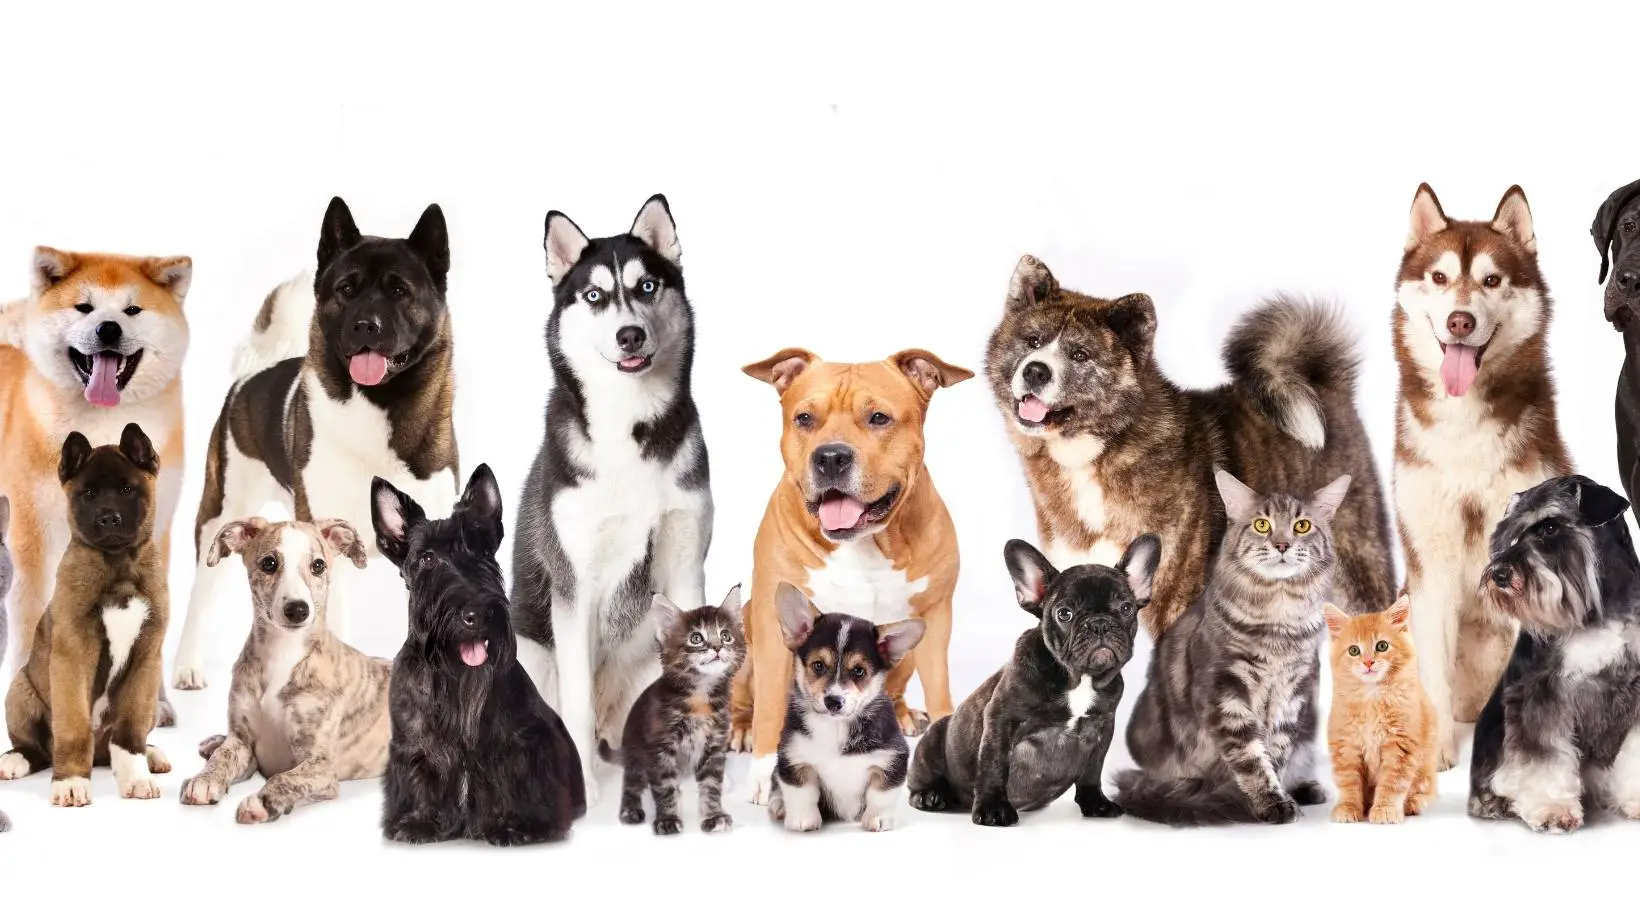 Are Cats More Popular Than Dogs?